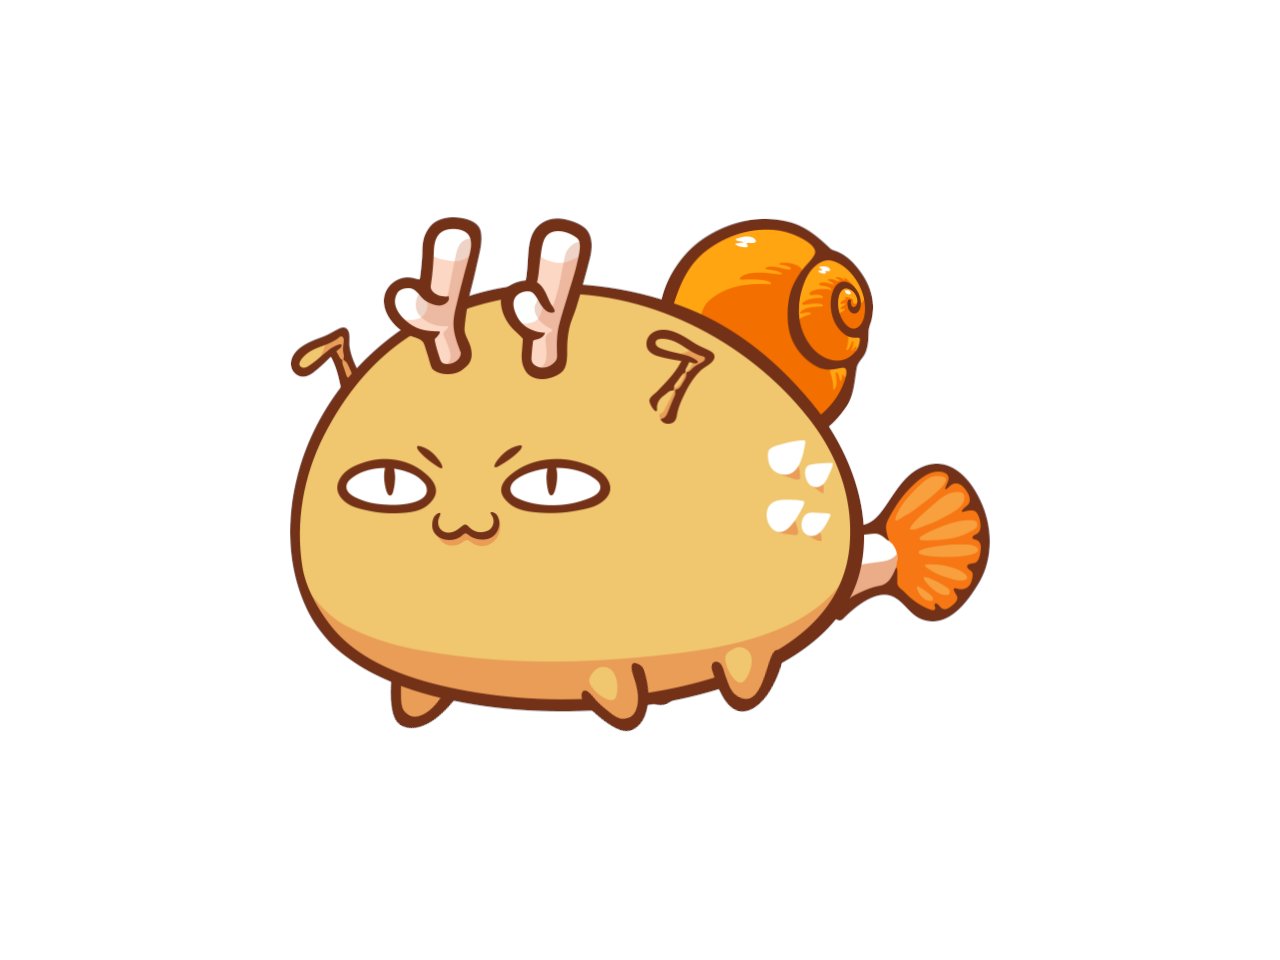 How to use energy in Axie Infinity